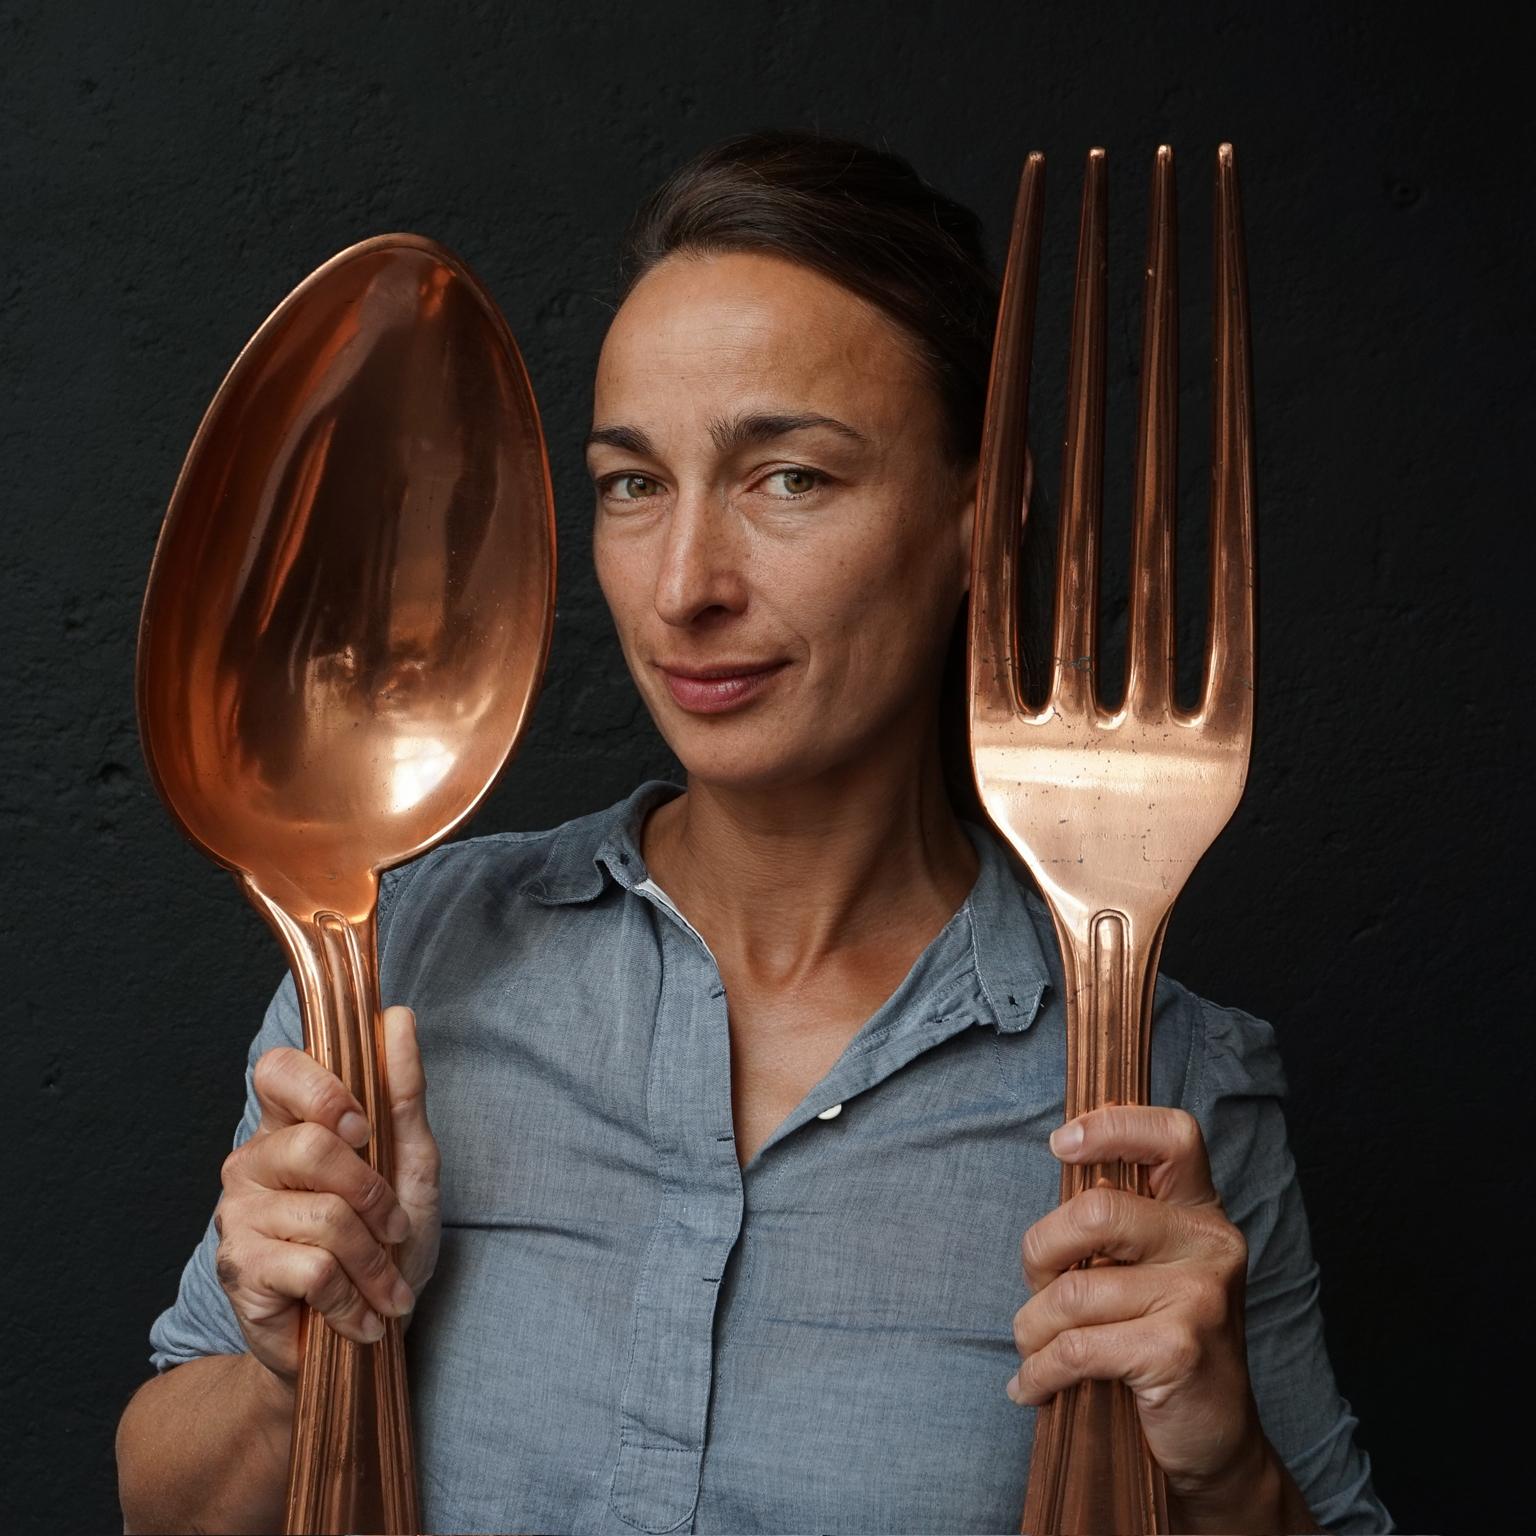 Very lovely heavy larger than life vintage massive brass fork and spoon with copper finish.
These will bring out the Sophia Loren in you! 
 
Great decoration piece for a restaurant or home cook.

Dimensions: Fork H 75 cm, W 11 cm, D 9 cm. Spoon